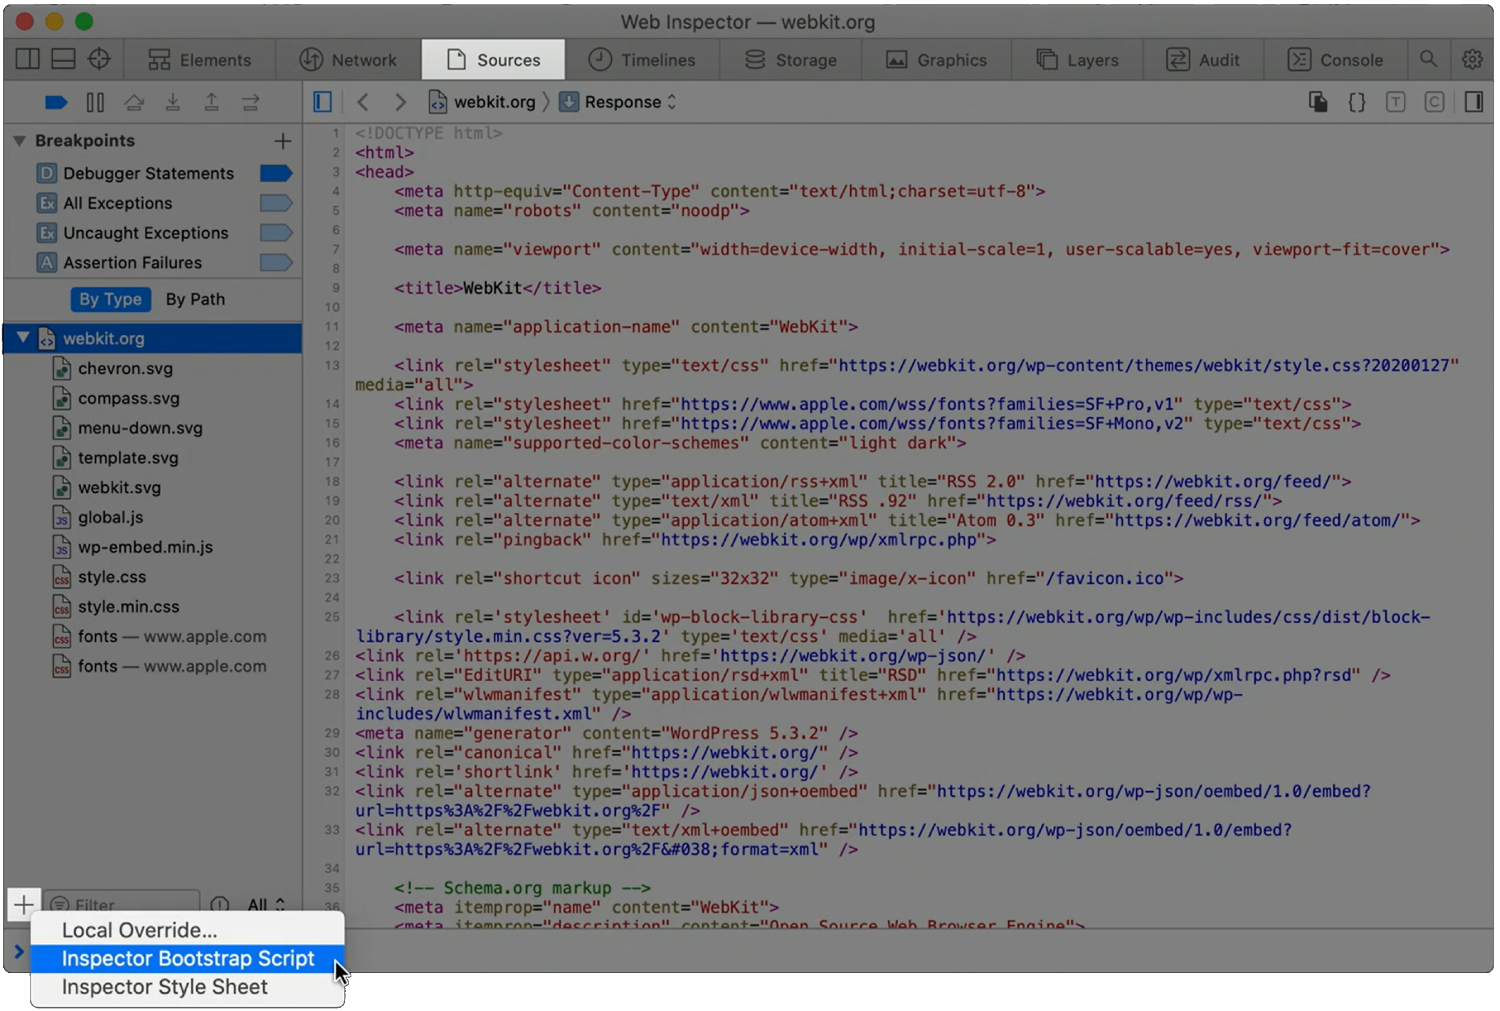 The Sources tab in Safari's WebInspector, showing the Add resource button and the Bootstrap script type